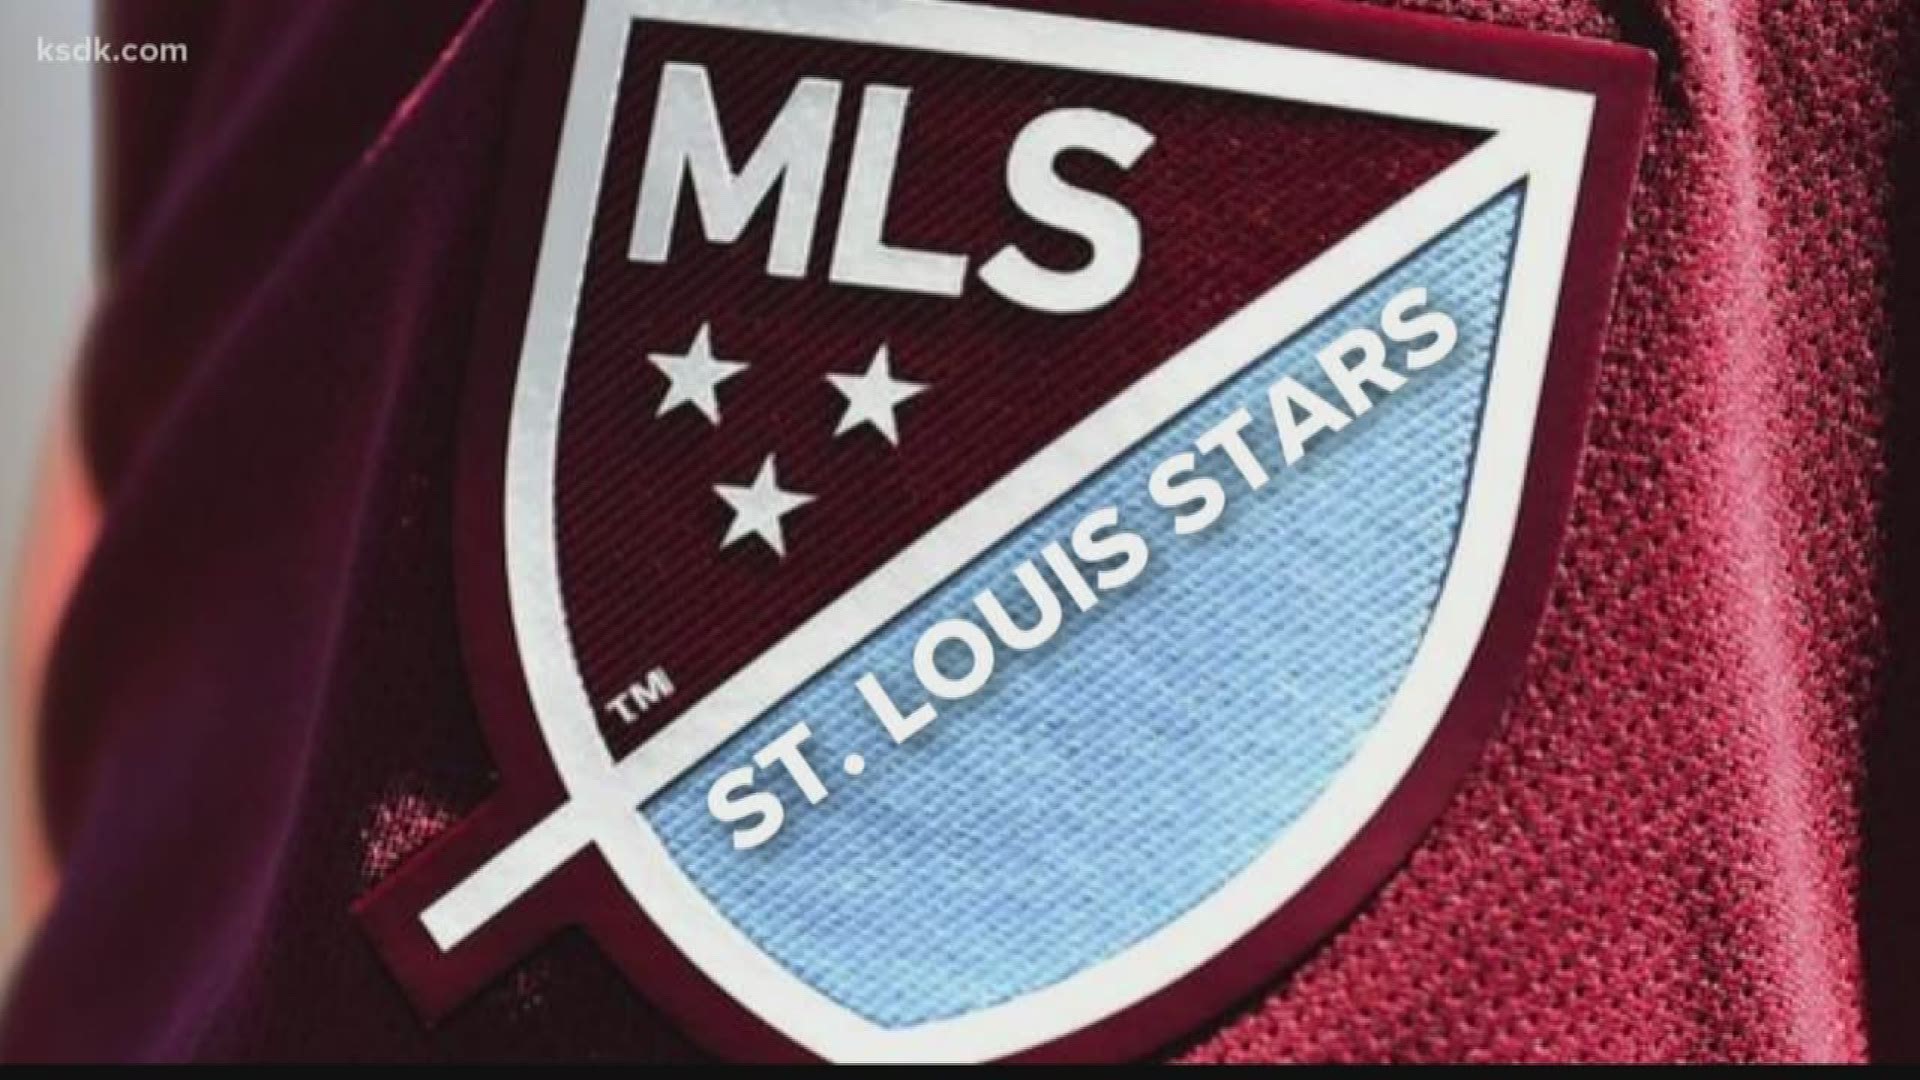 By now you've heard St. Louis has added a third major professional franchise, Major League Soccer is coming to town as the 28th team to be added to the league. So, what does it really mean for you, the fan?